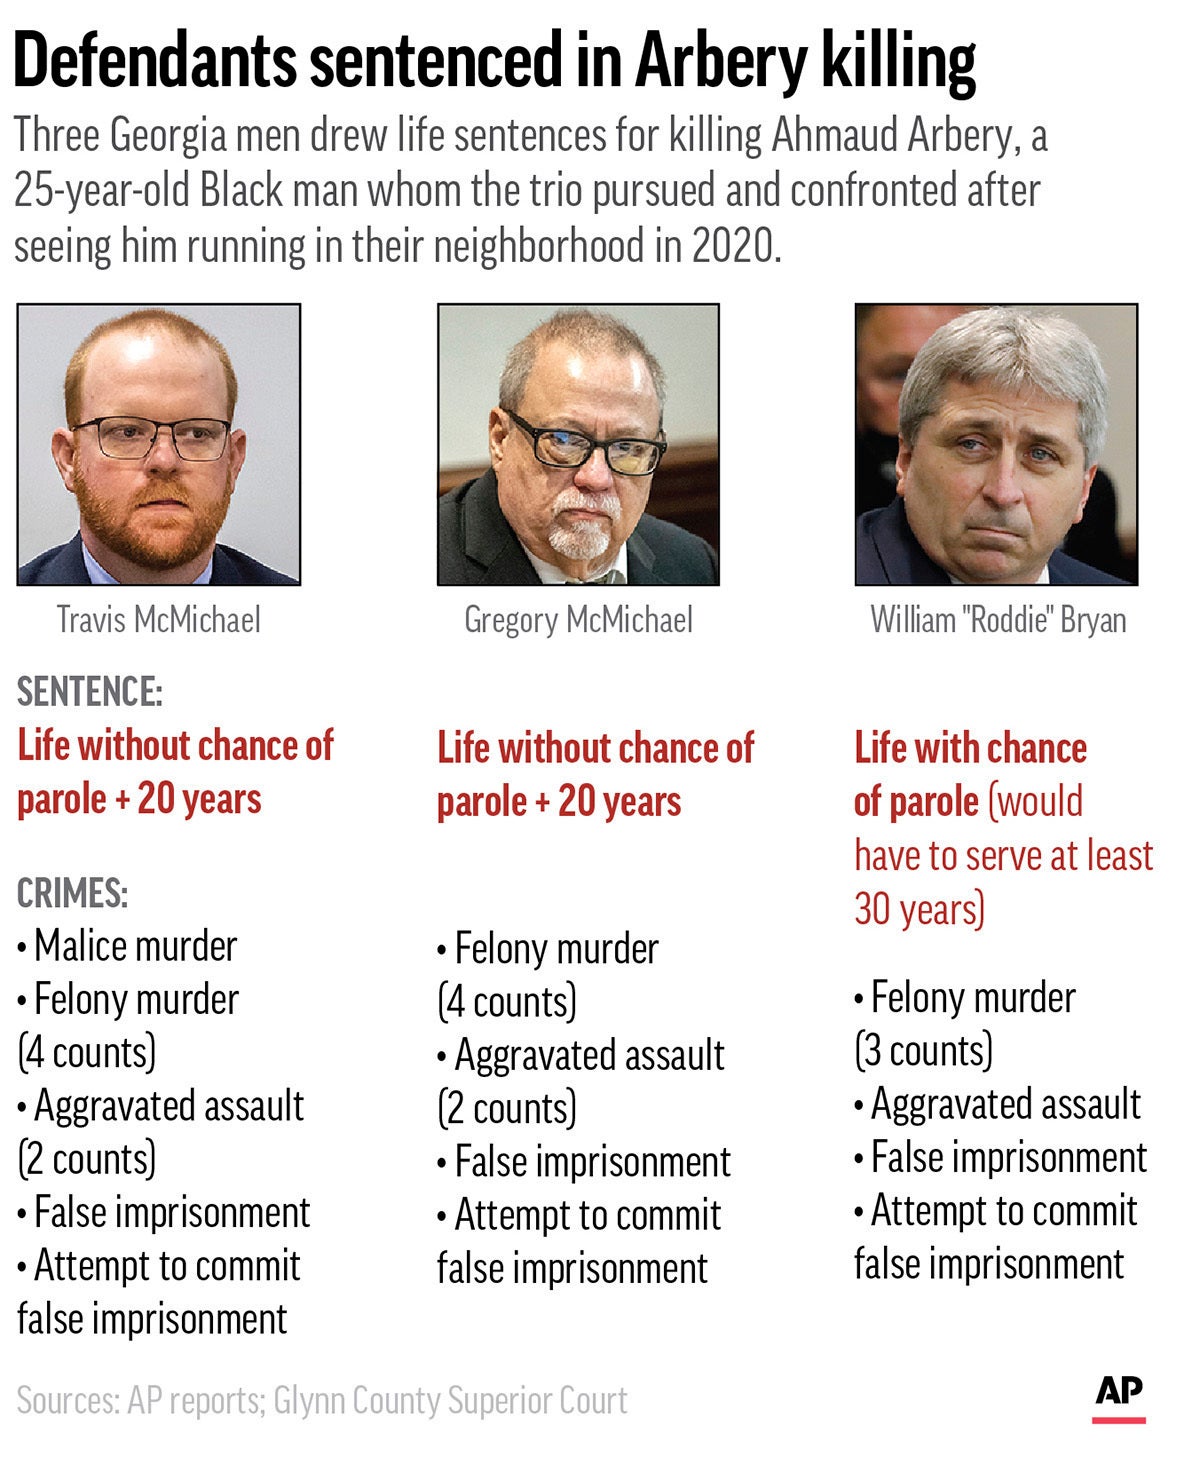 The sentencing breakdowns for the three murderers of Ahmaud Arbery